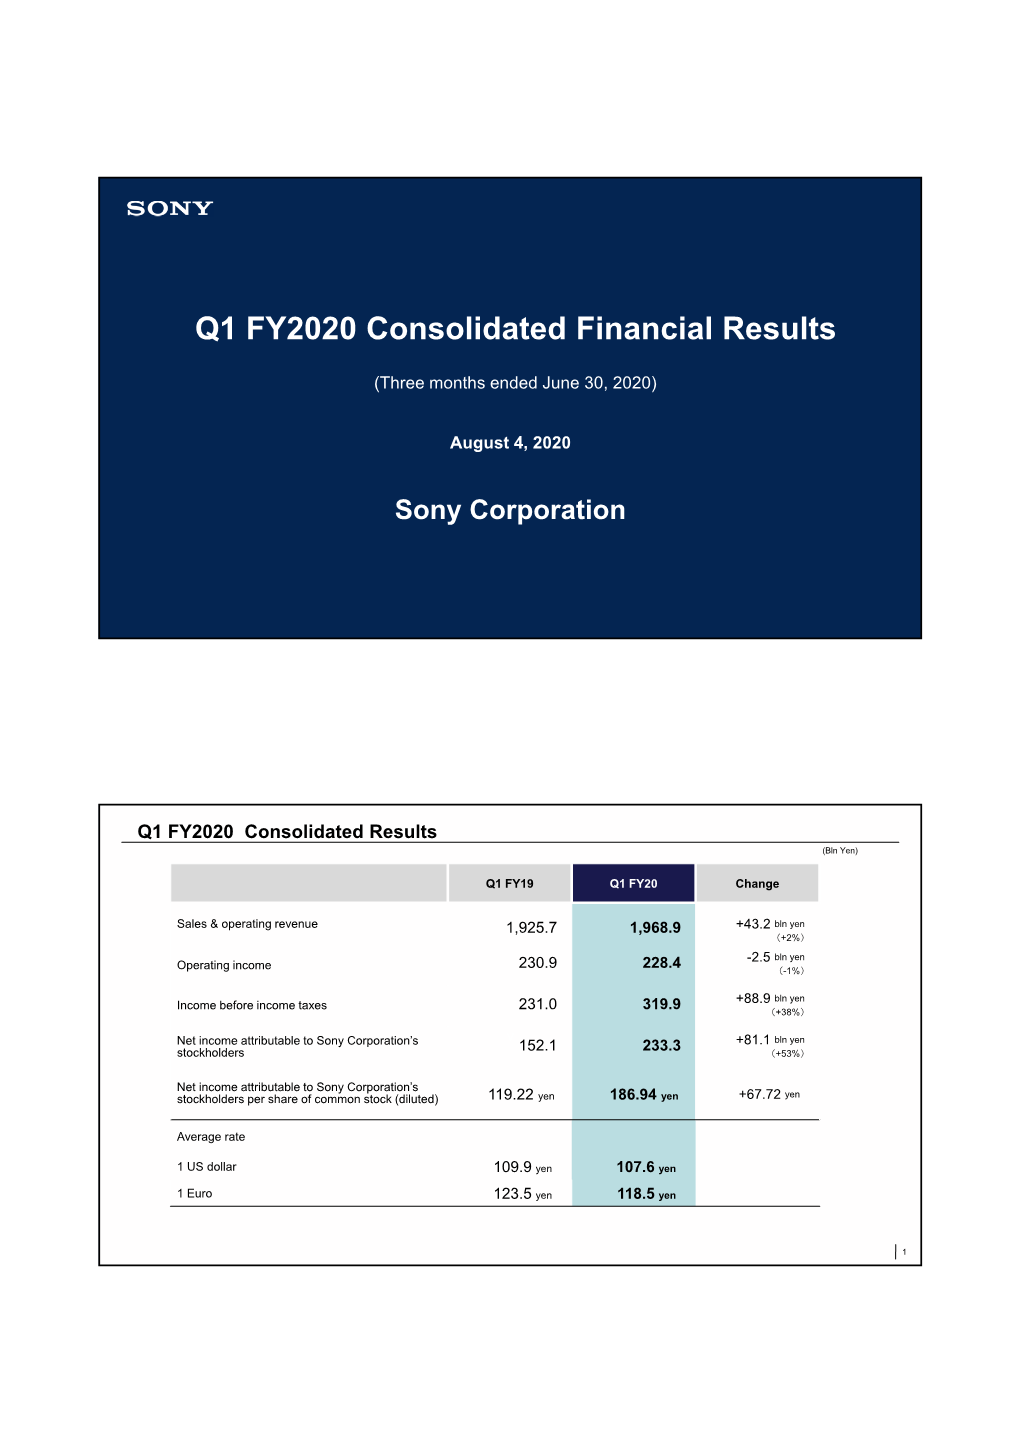 Q1 FY2020 Consolidated Financial Results